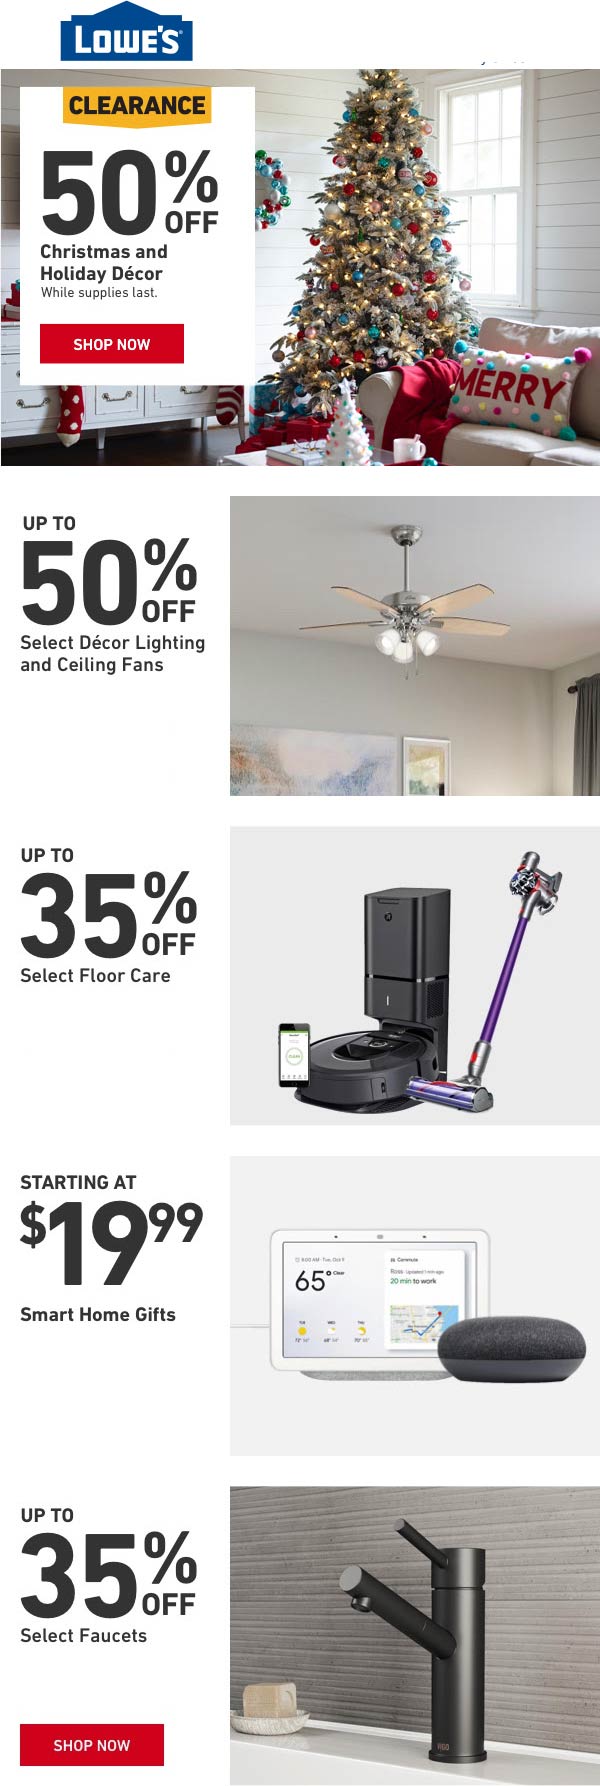 Lowes coupons & promo code for [May 2022]